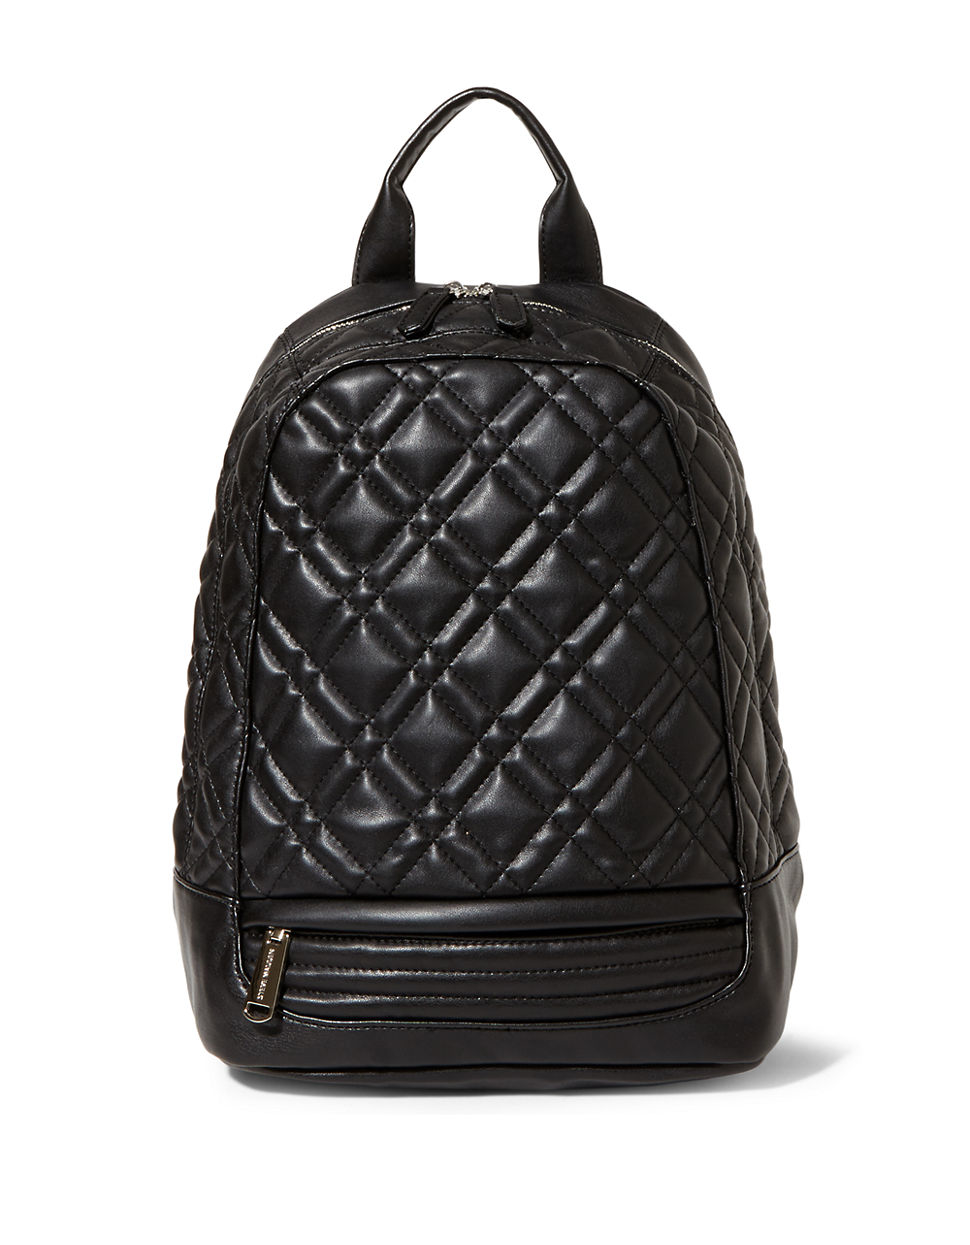 Steve Madden Quilter Faux Leather Backpack in Black - Lyst